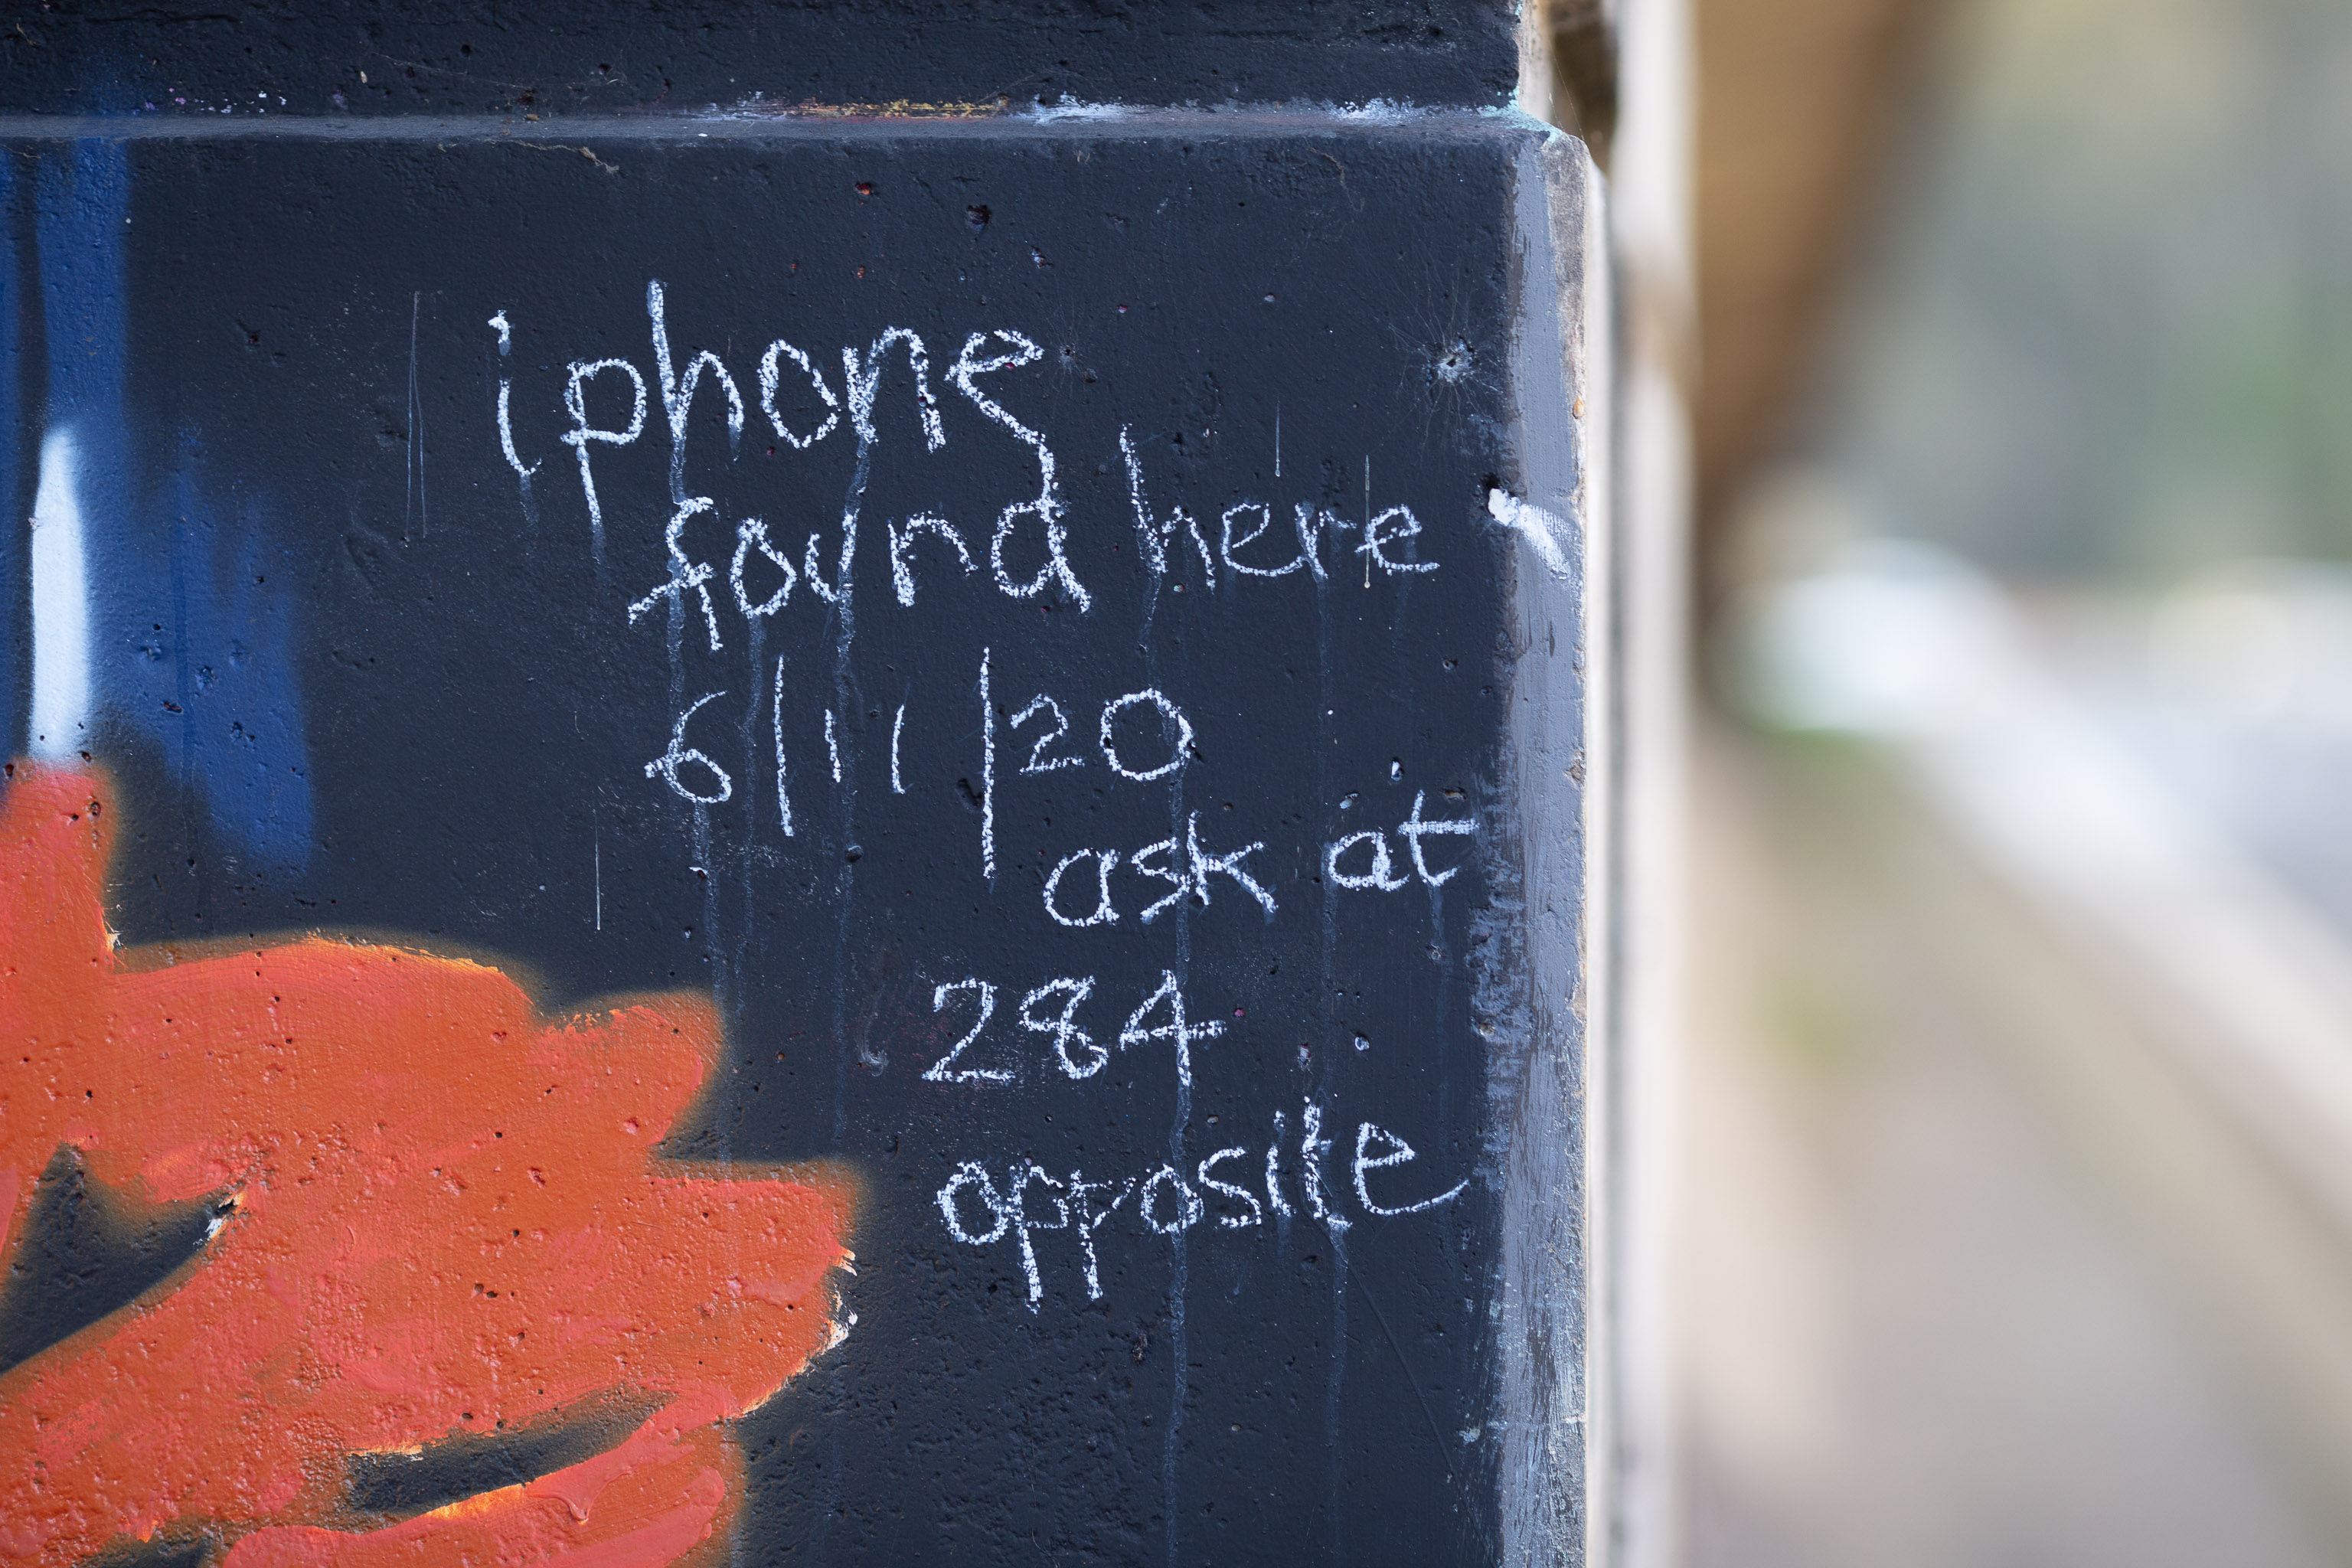 iPhone Found Here
